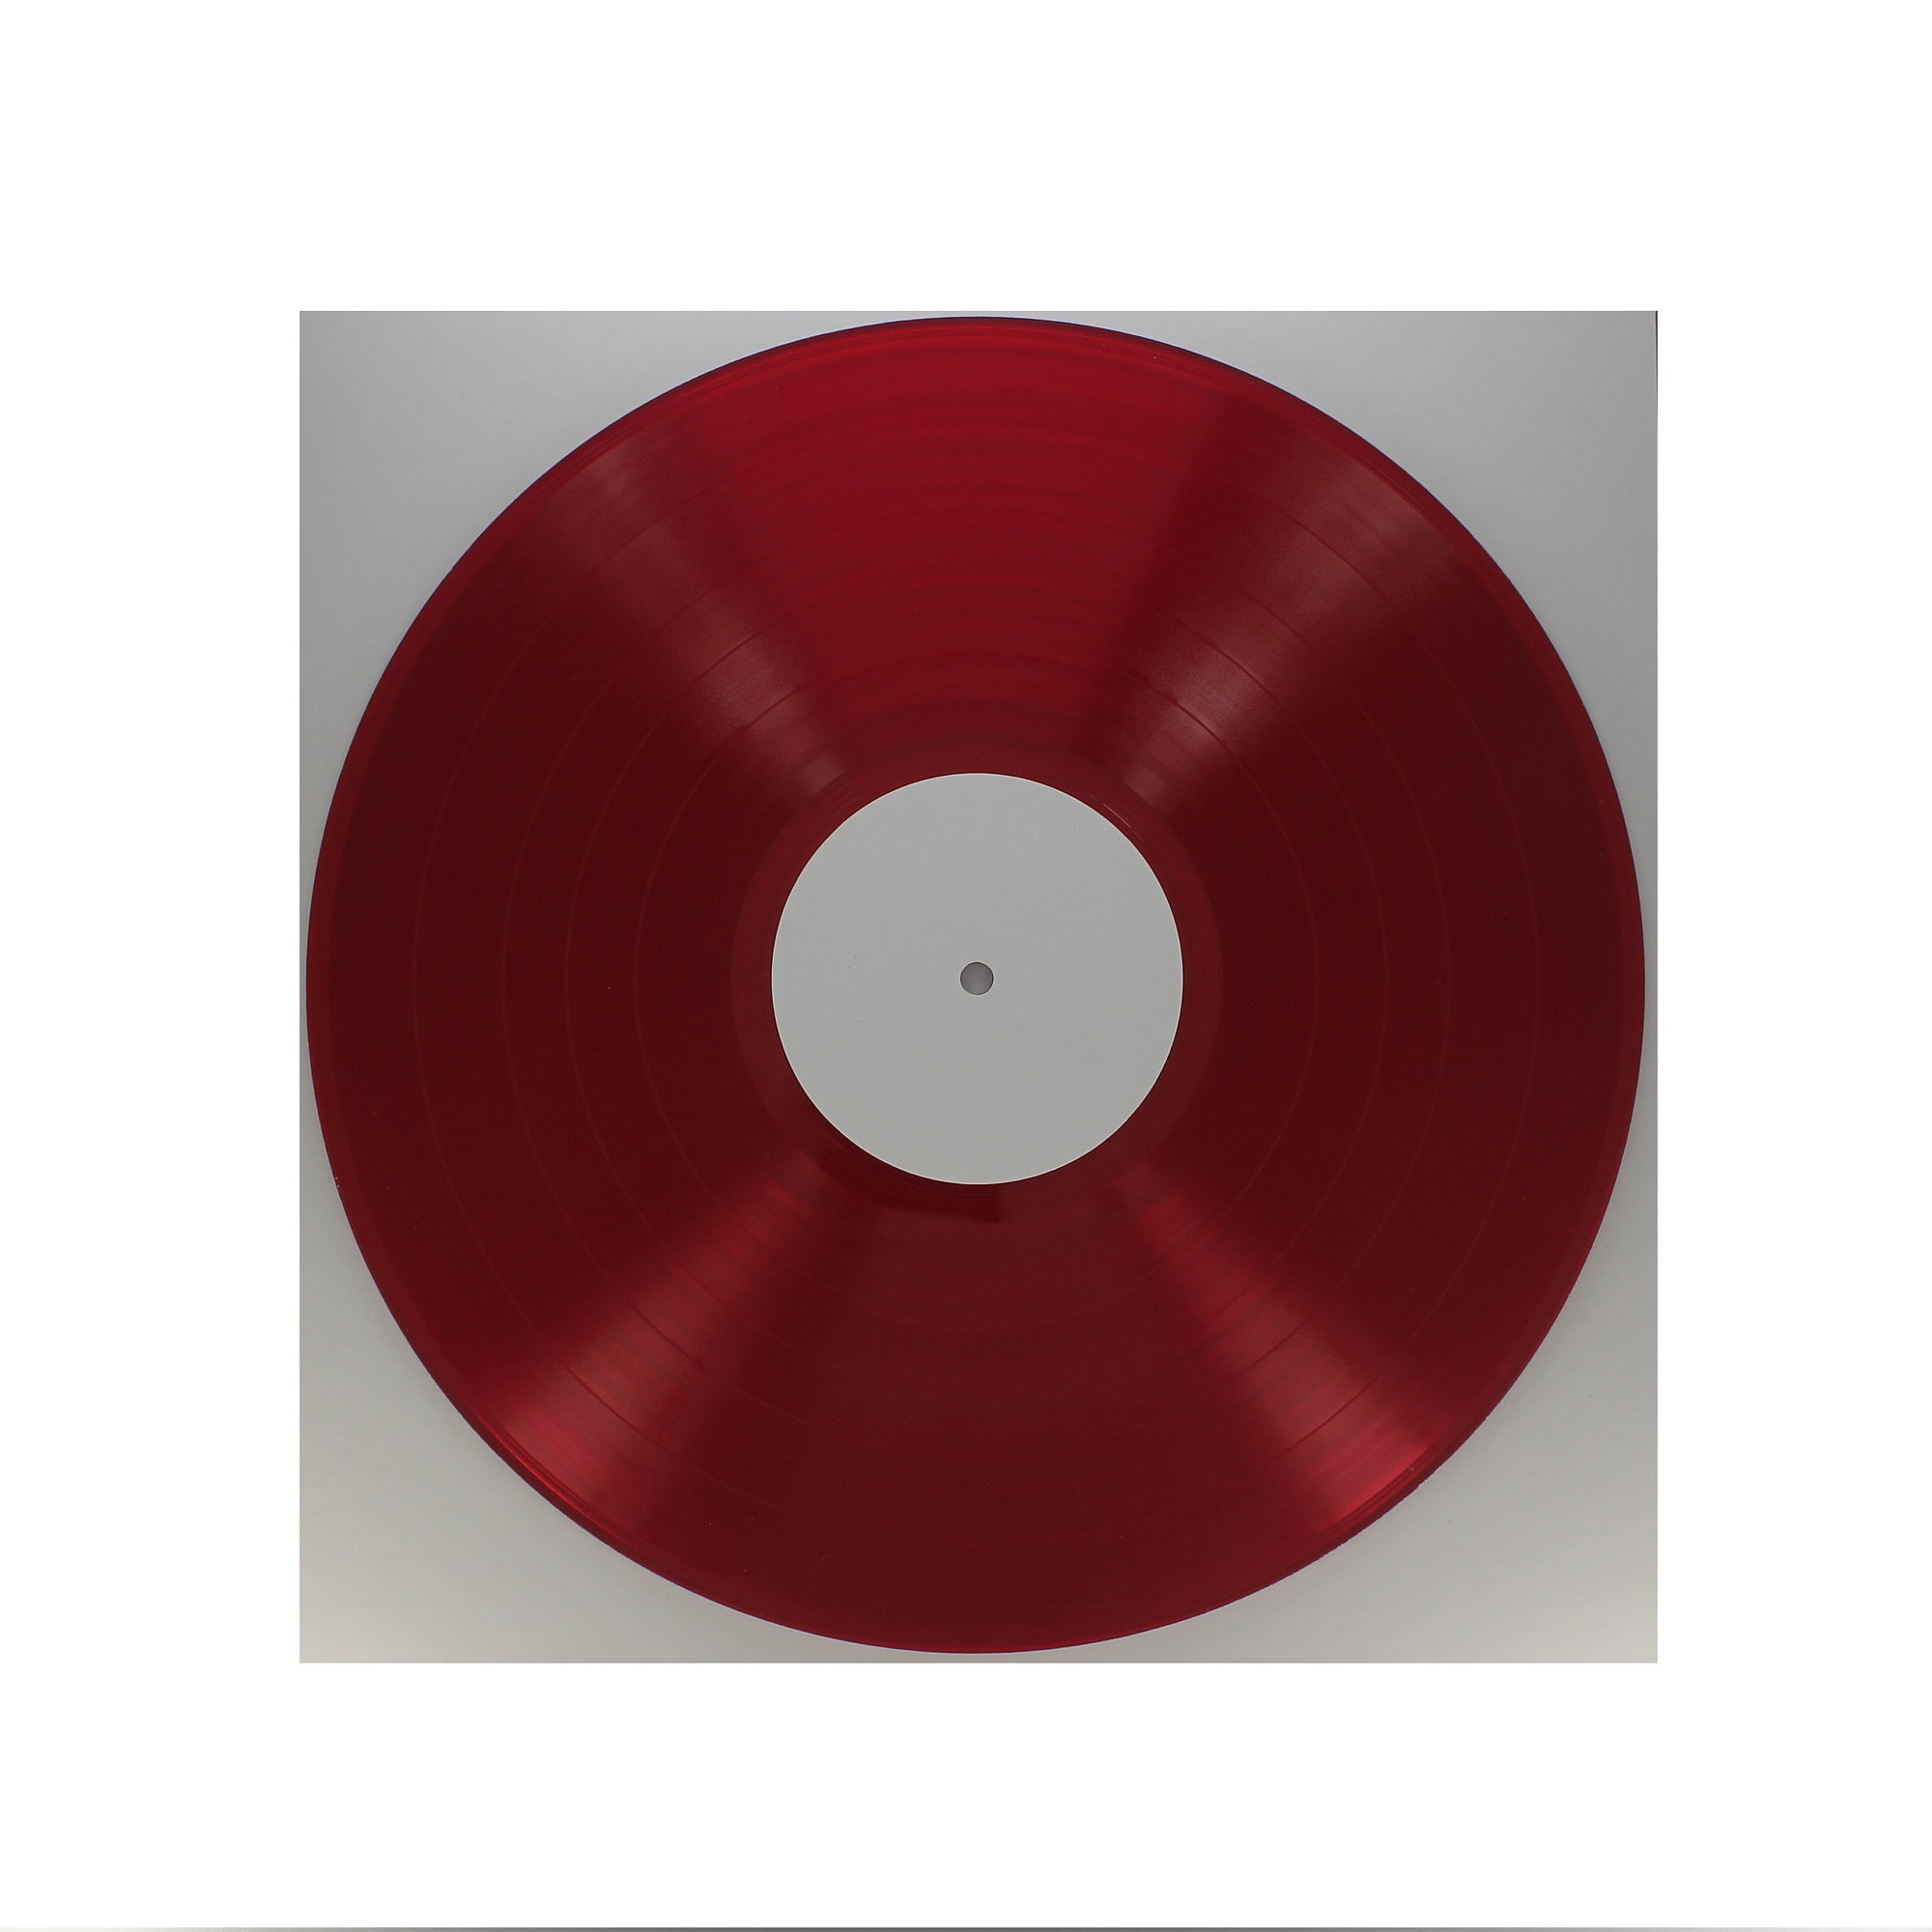 12 RED Translucent Custom Vinyl Record Two Sided LIMITED up to 6 Tracks and  22 Minutes per Side please Read Listing Description Below 